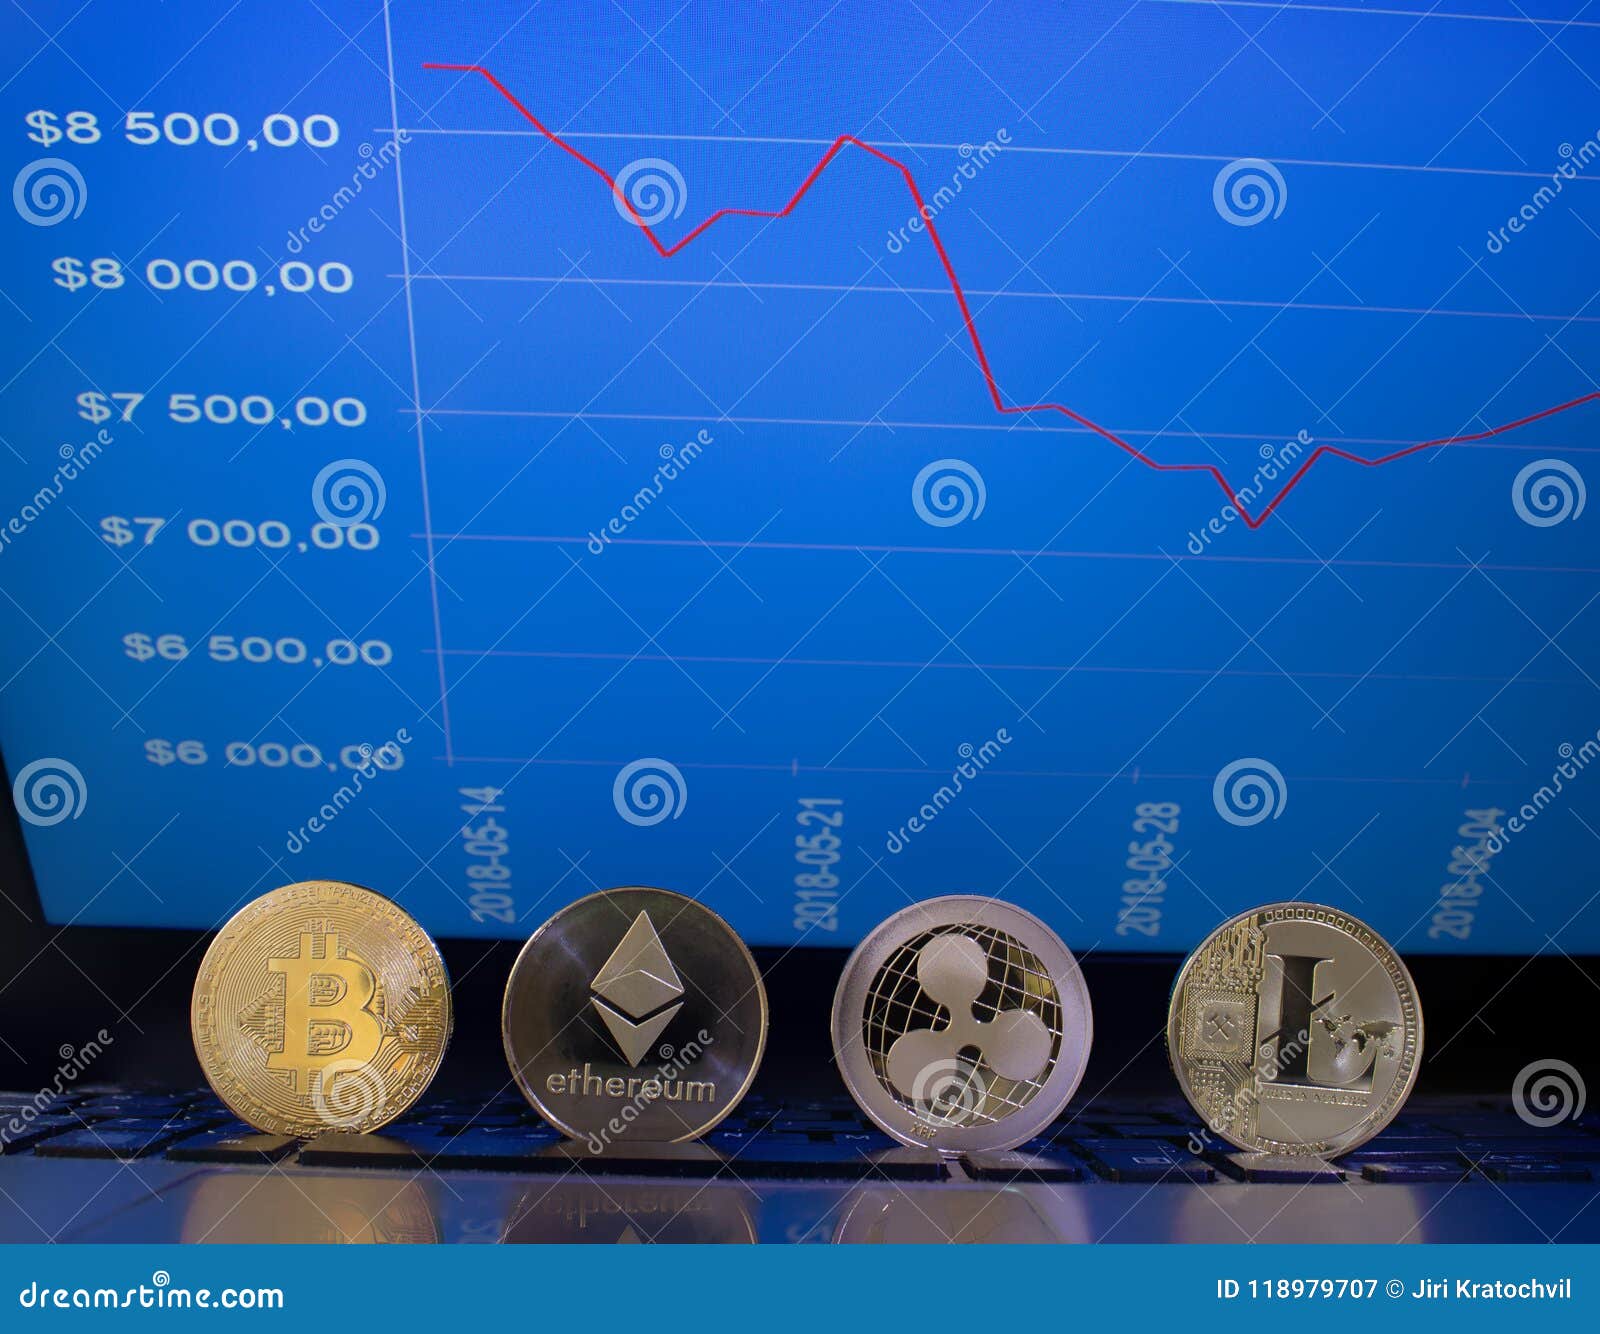 Crypto Currency Coins And Graph With Prices Stock Image ...